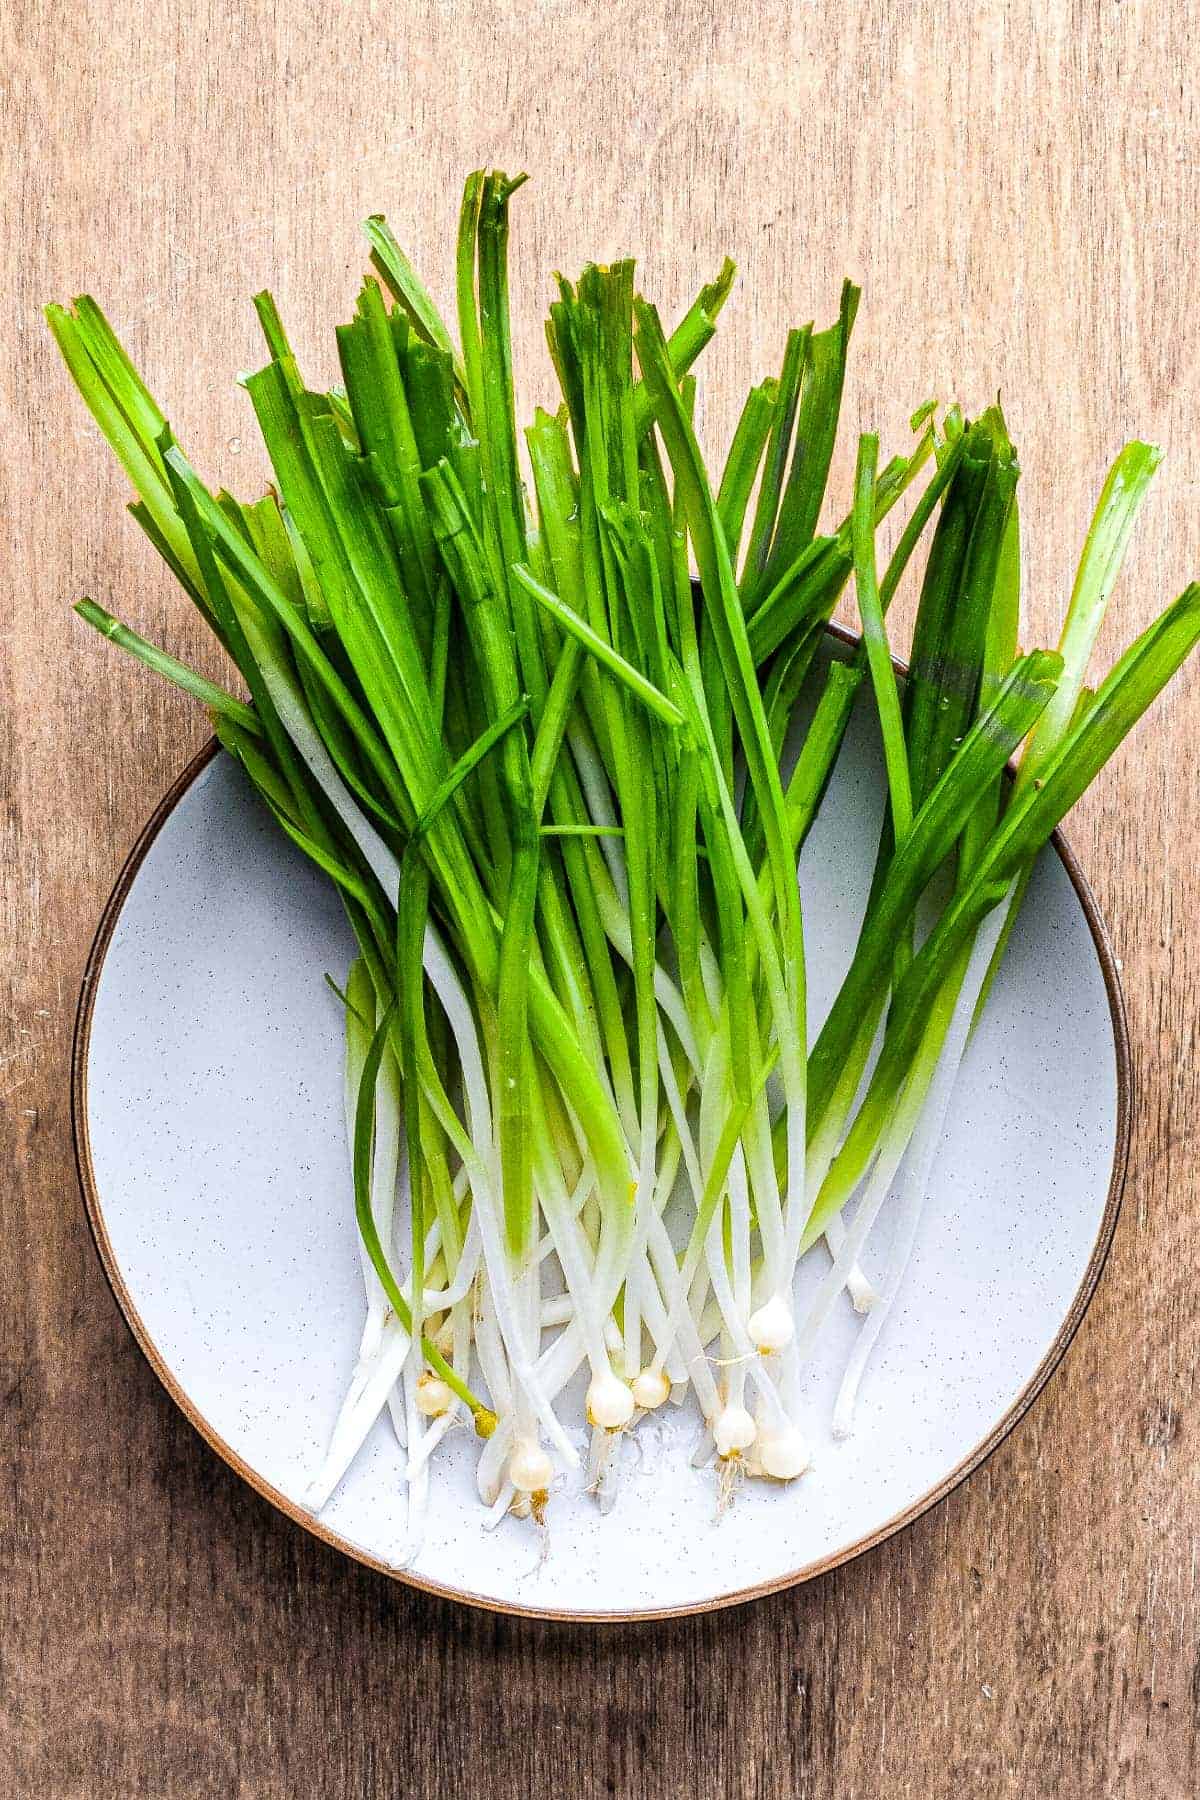 Wild onions freshly washed in a bowl